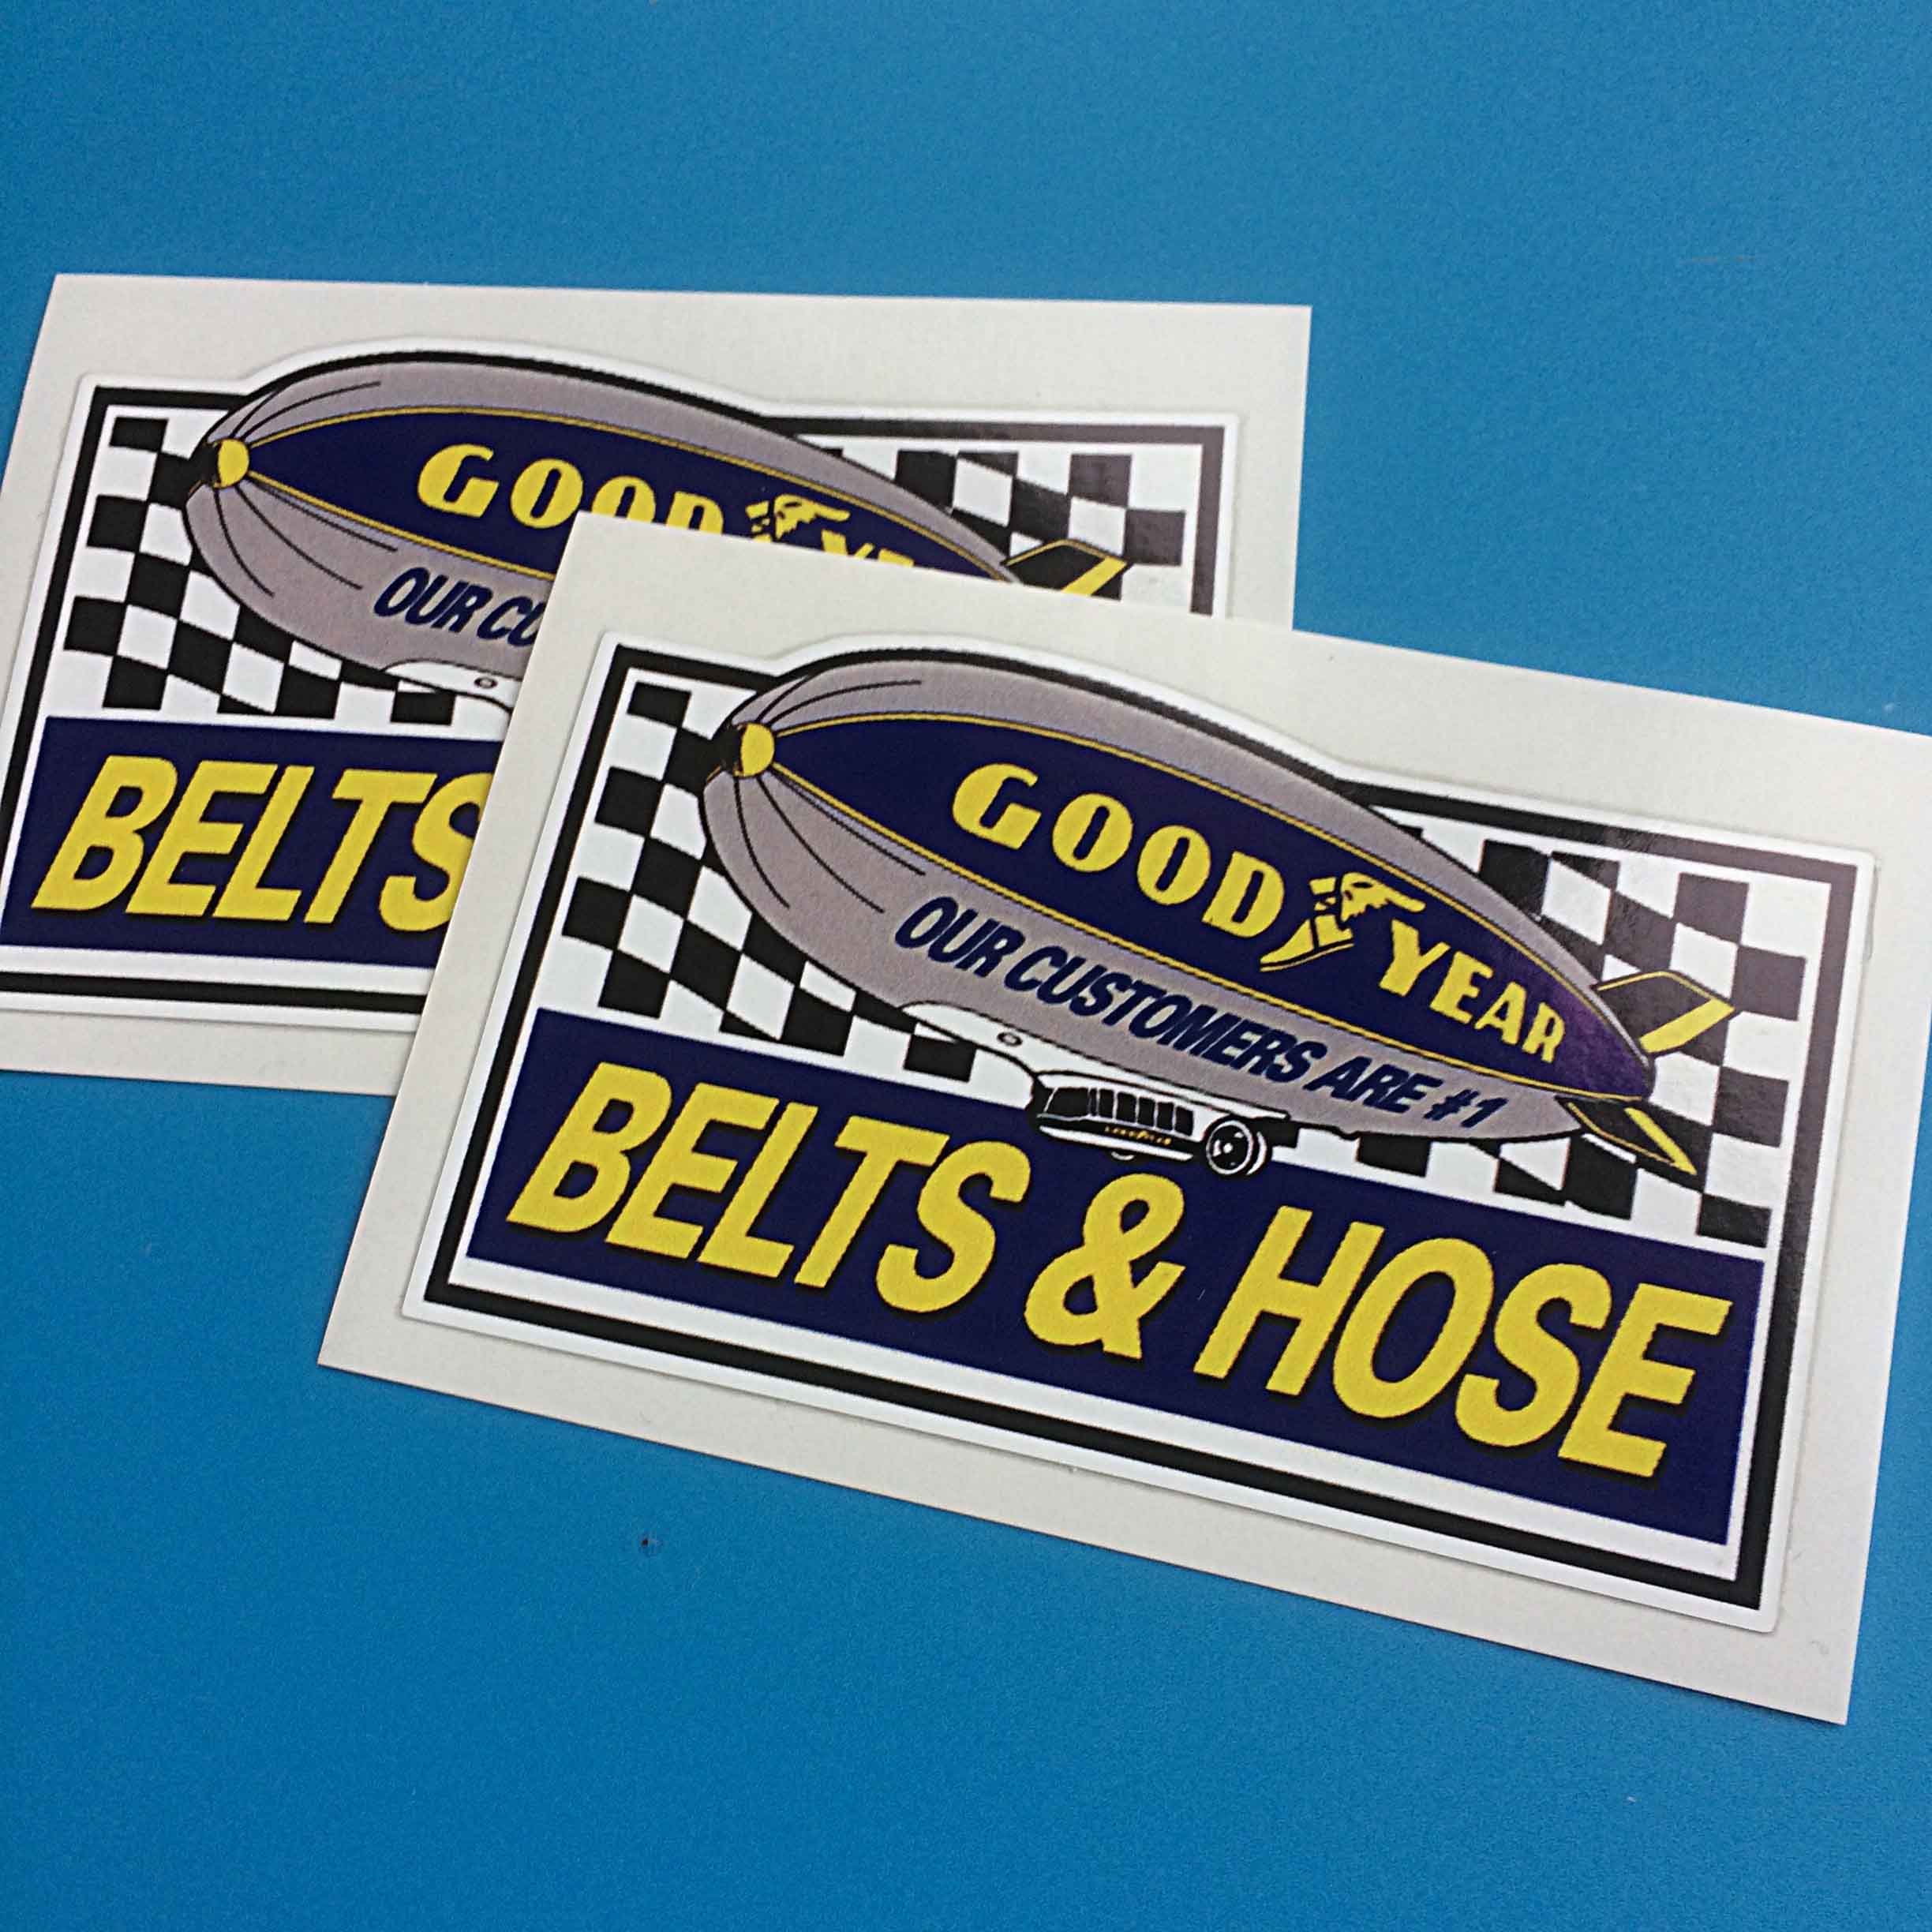 GOODYEAR BELTS AND HOSE STICKERS. An airship displaying the Goodyear logo Our Customers Are #1 on a black and white chequer background. Belts & Hose in yellow lettering on a blue banner is below.